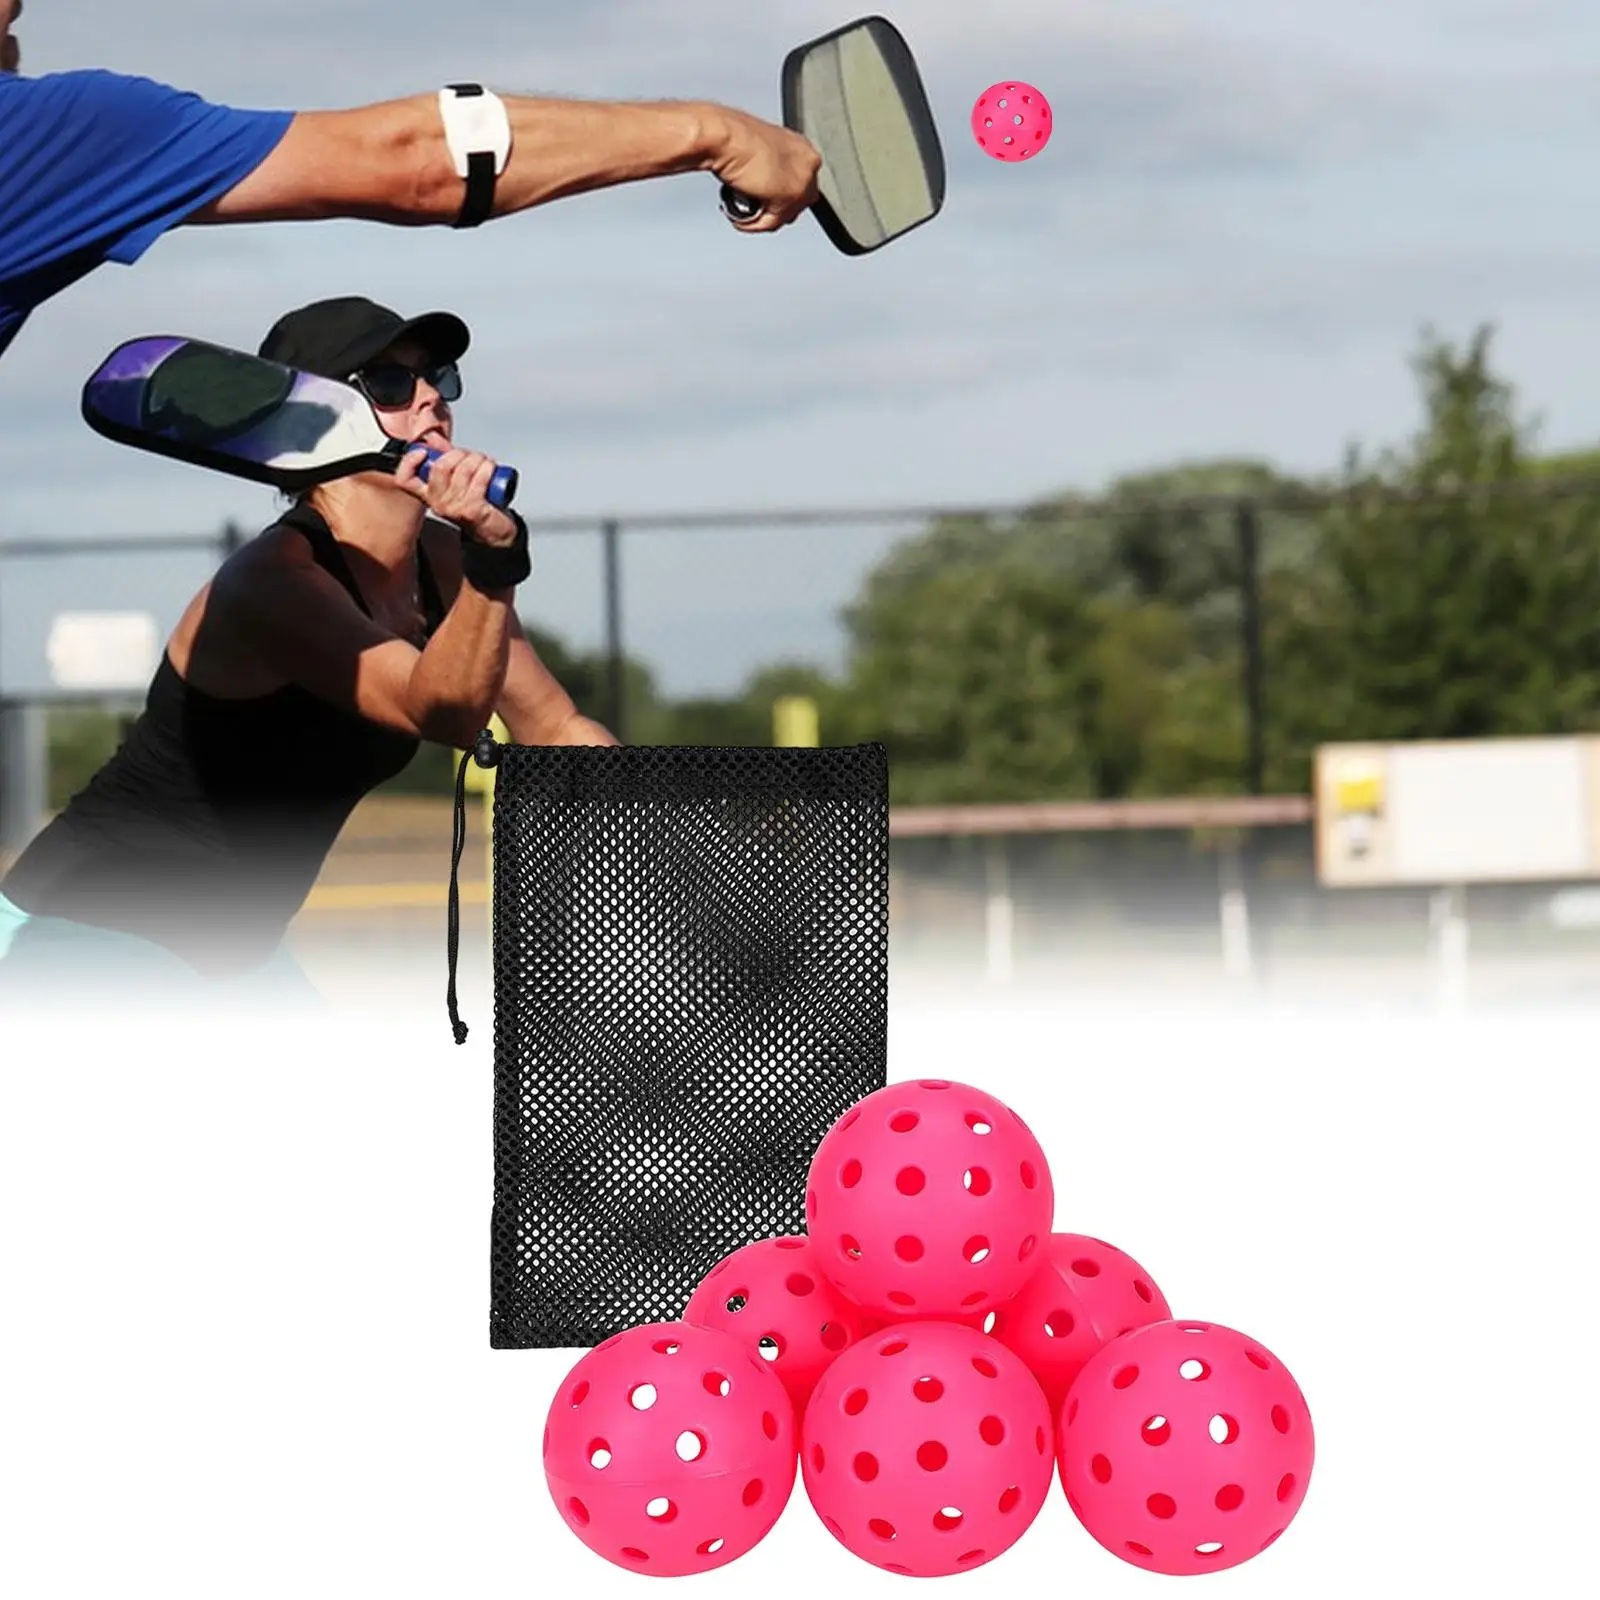 6 Pieces Pickleball Balls Durable Official Size Ball for Outdoor Courts